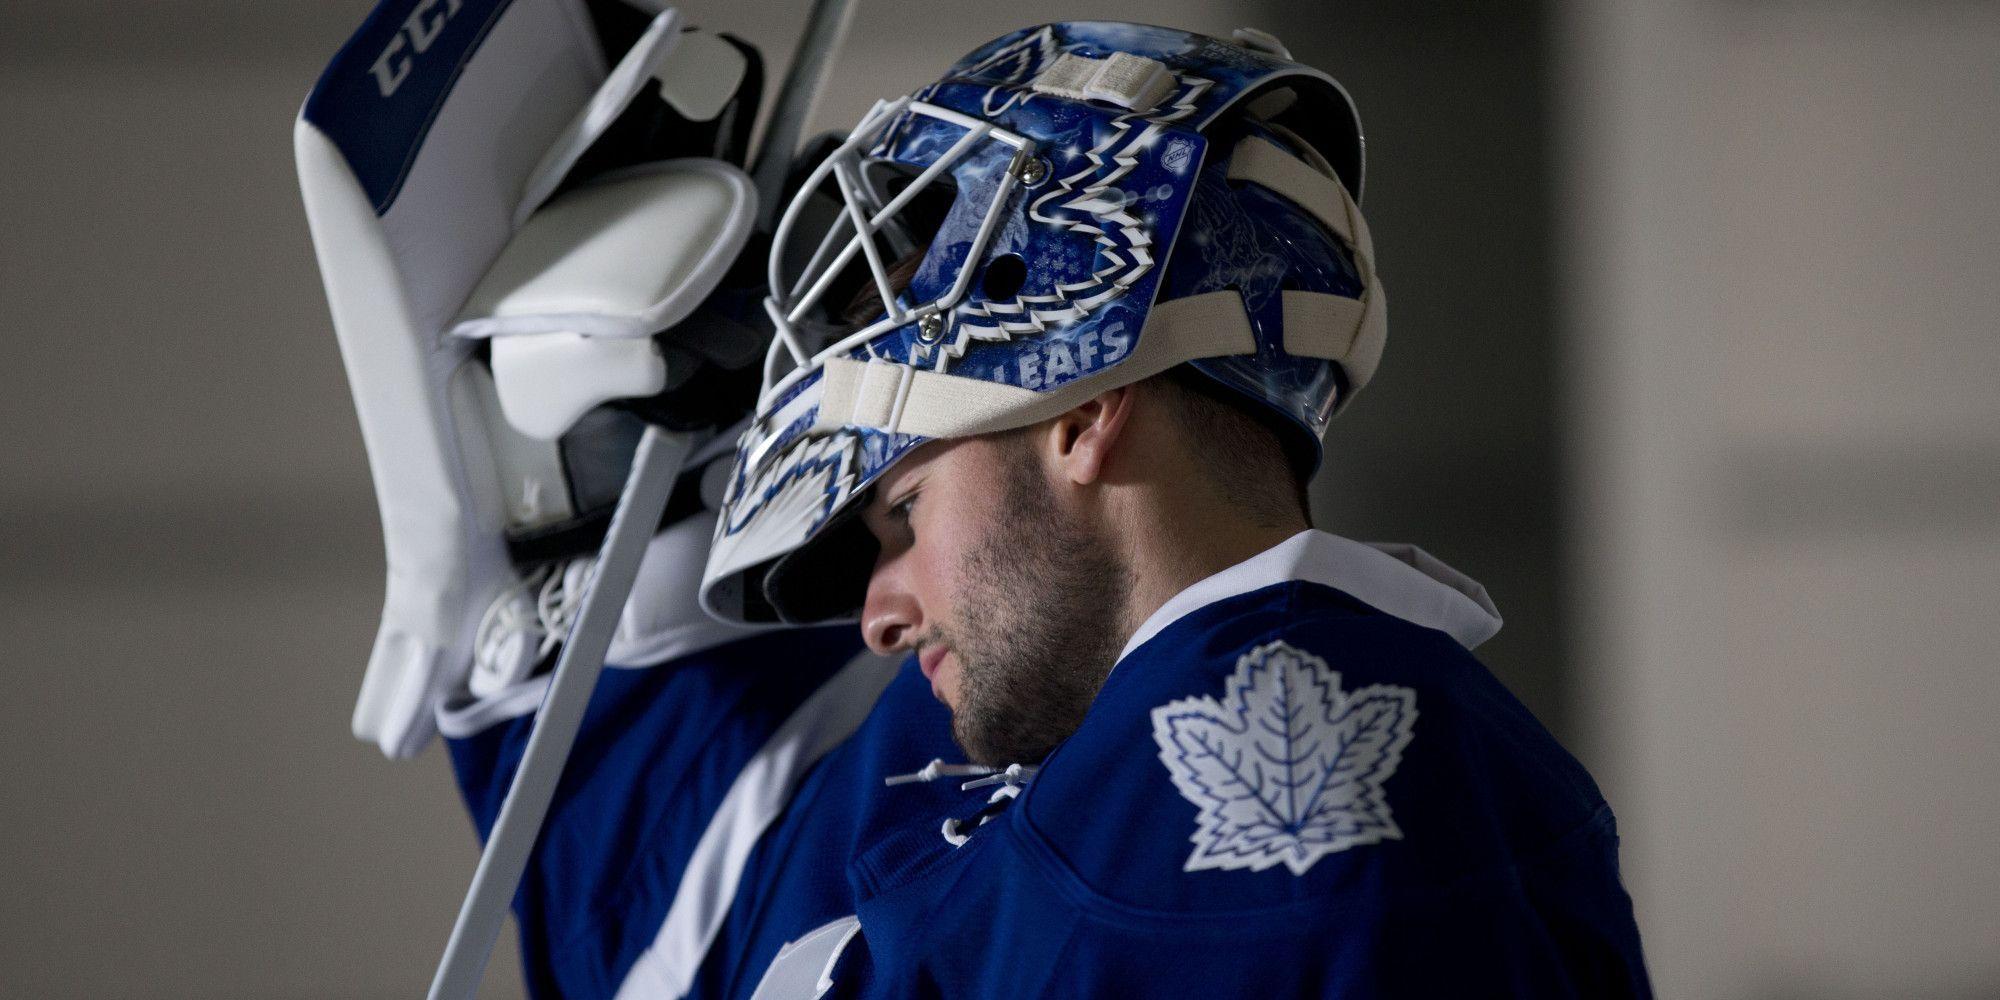 Toronto Maple Leafs Worst Sports Franchise In North America: ESPN